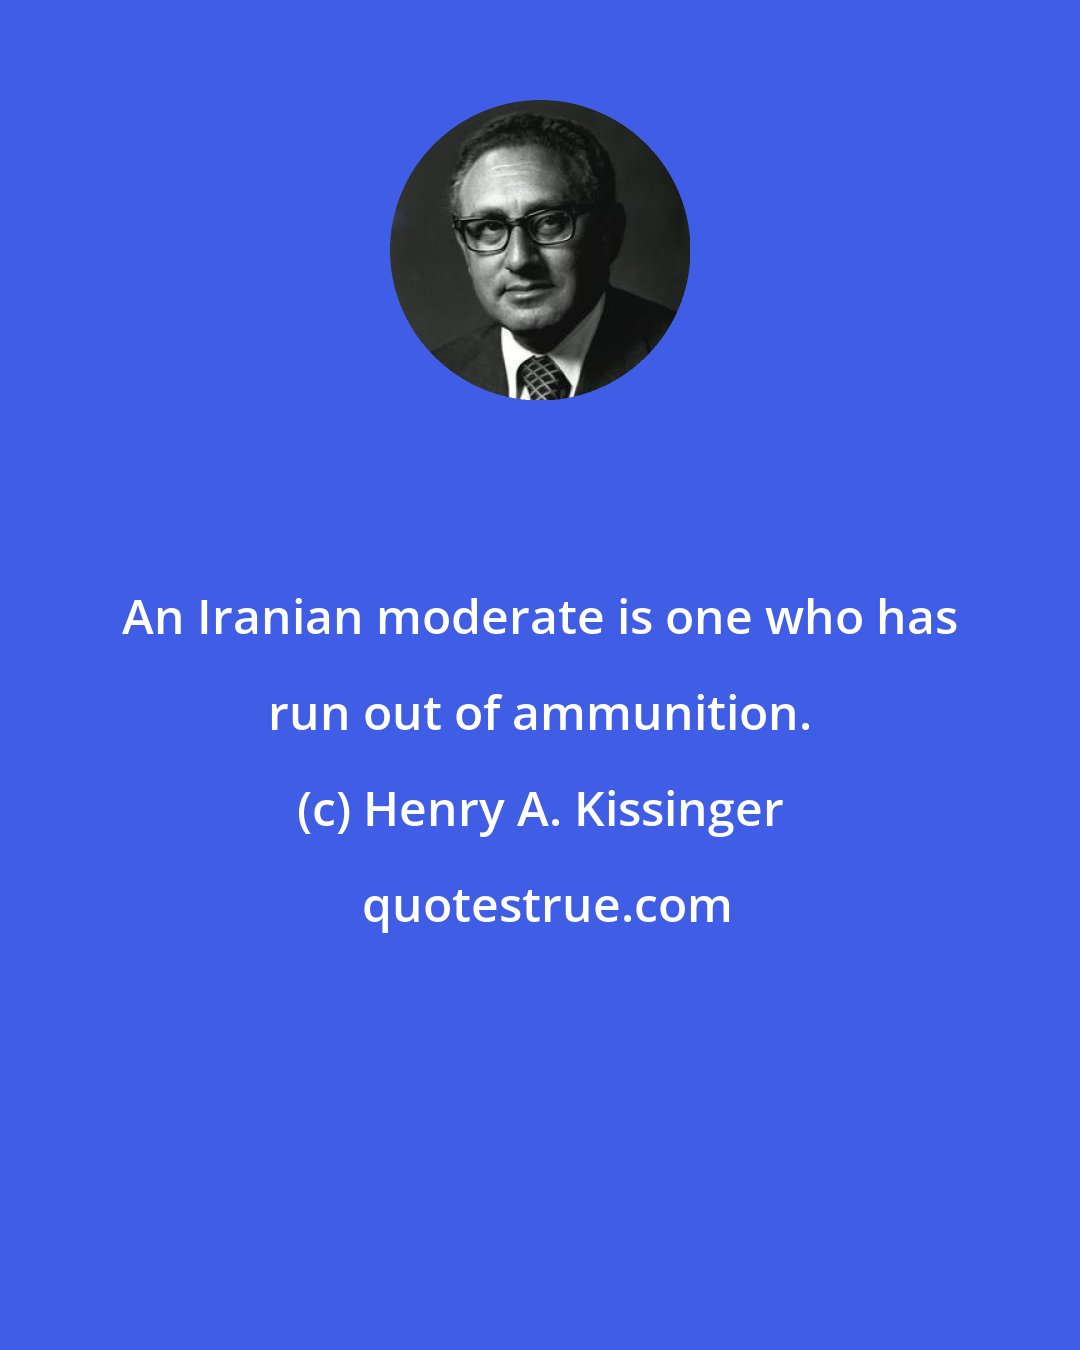 Henry A. Kissinger: An Iranian moderate is one who has run out of ammunition.